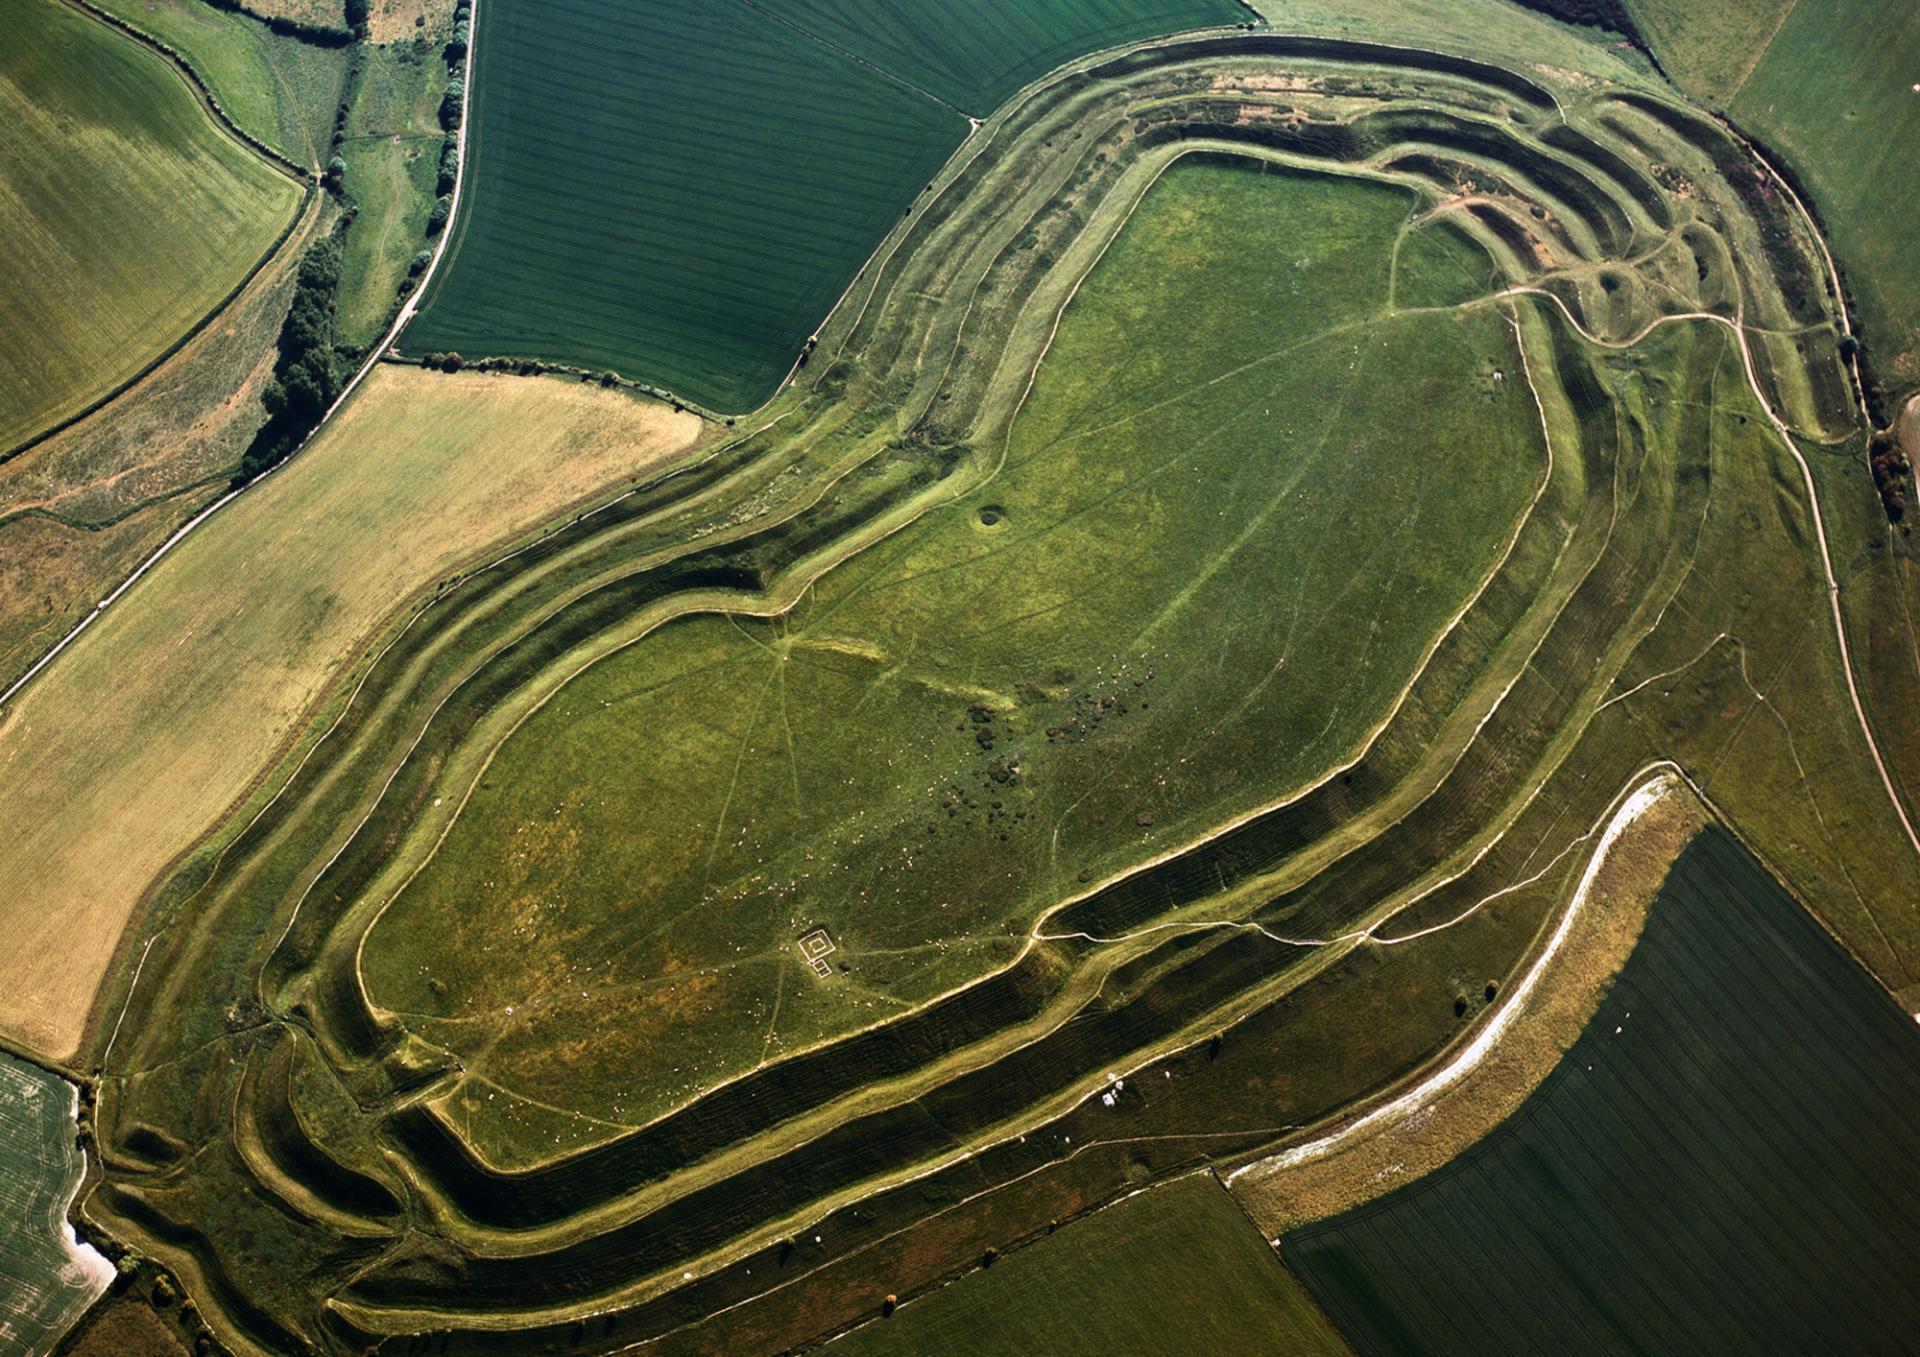 Maiden Castle Dorset - A Fascinating Iron Age Hillfort That Is The Largest And Most Complex In Europe